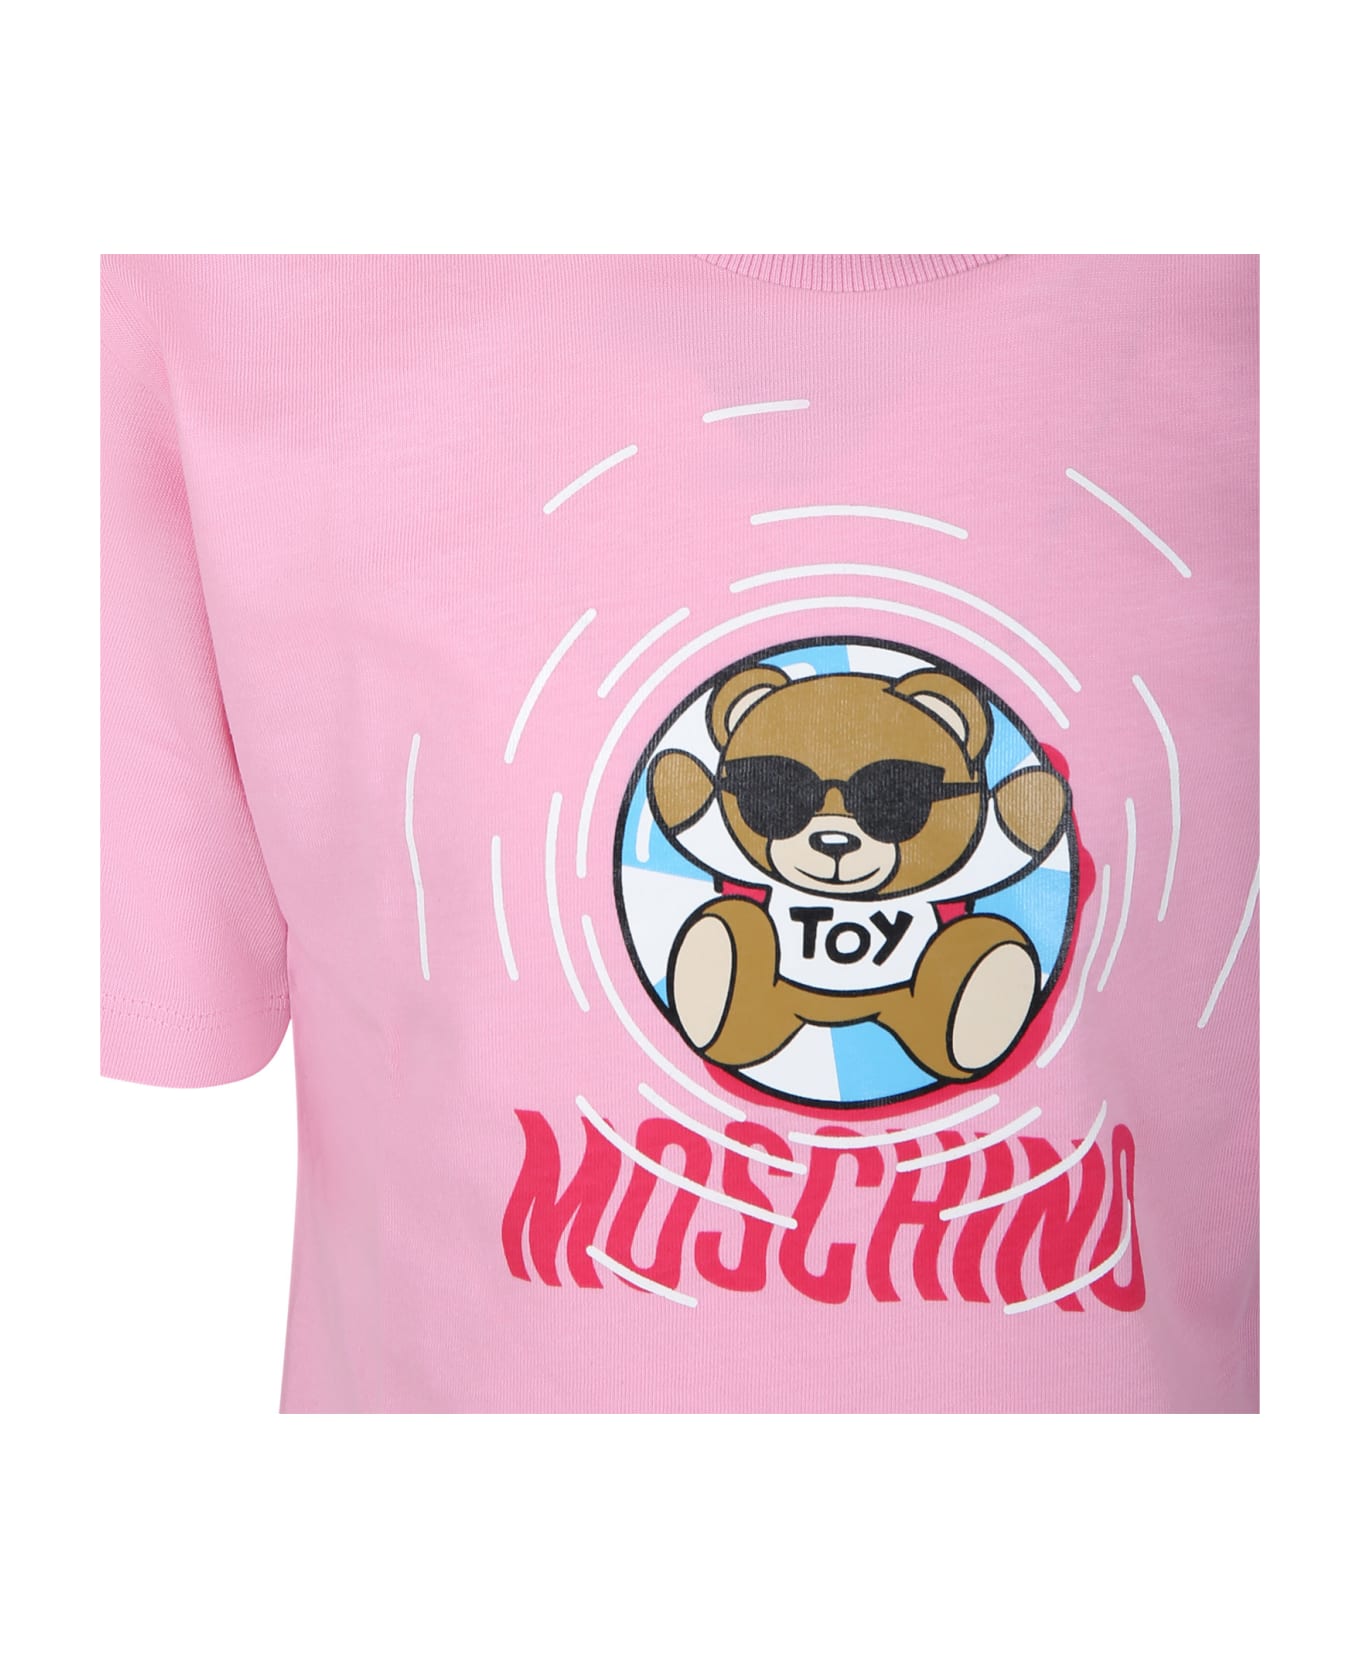 Moschino Pink T-shirt For Girl With Multicolored Print And Teddy Bear - Pink